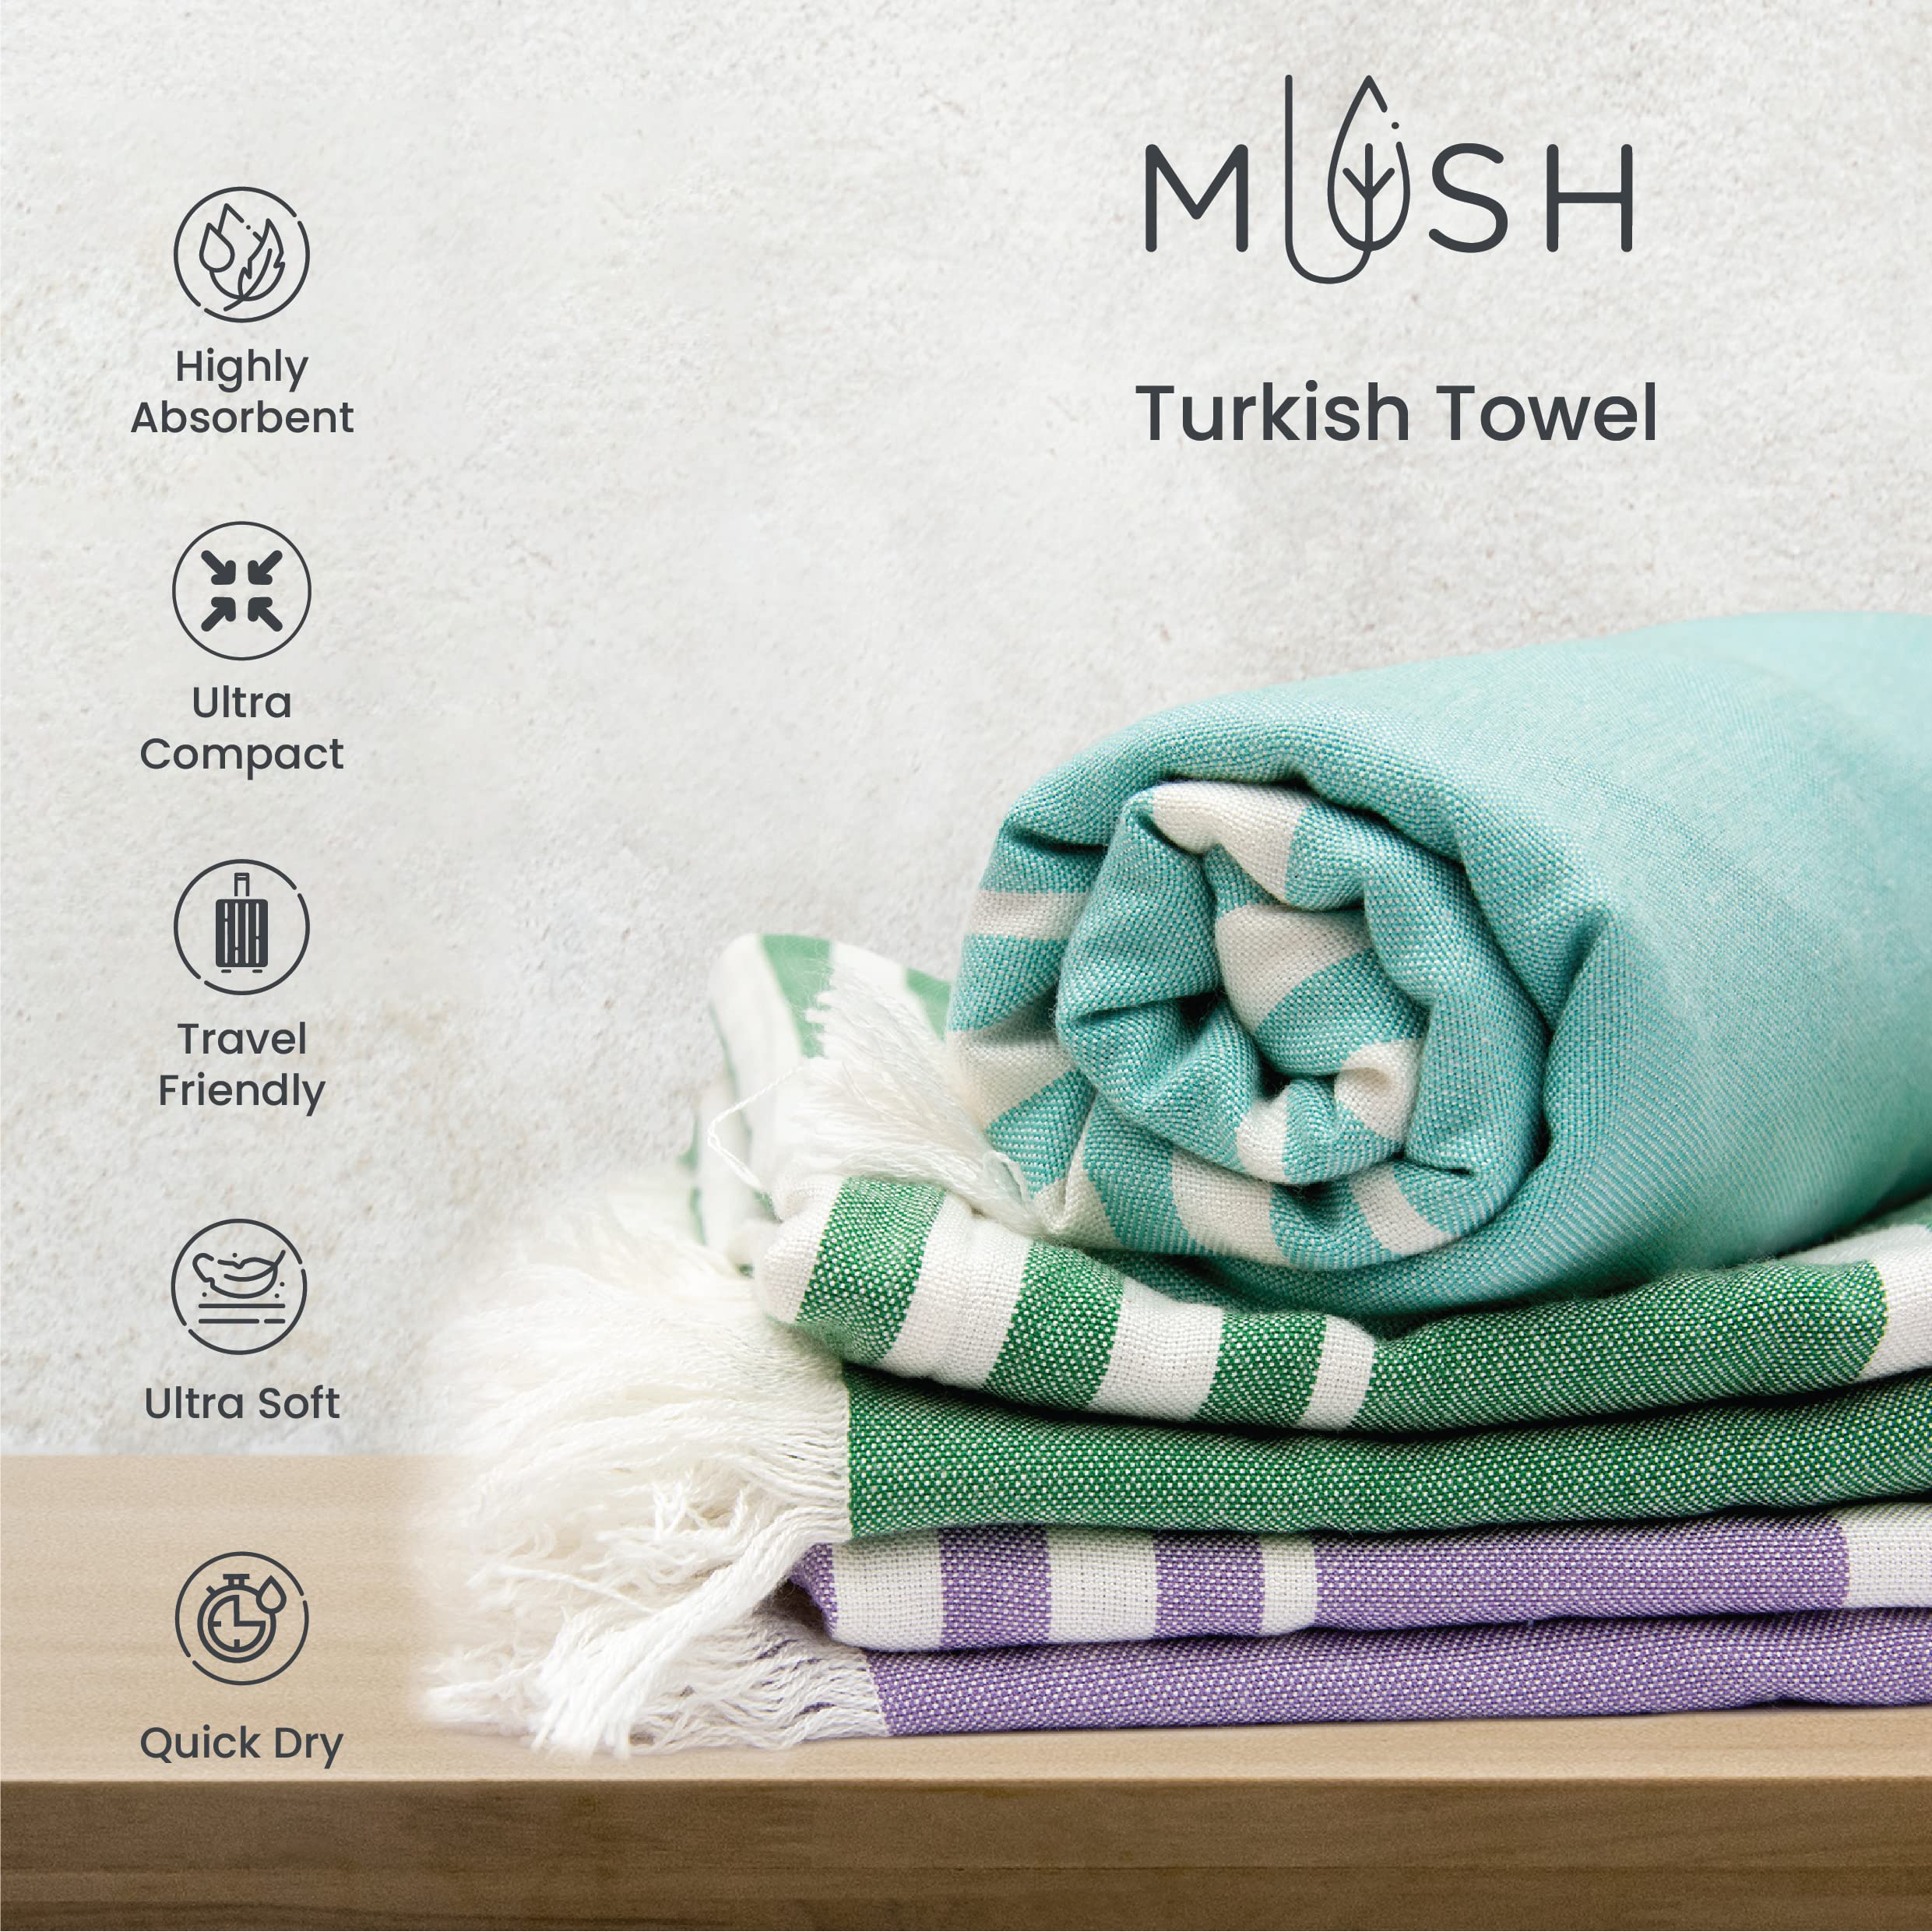 Mush 100% Bamboo Large Bath Towel | Ultra Soft, Absorbent, Light Weight, & Quick Dry Towel for Bath, Travel, Gym, Beach, Pool, and Yoga | 29 x 59 Inches / 75 X 150 cms Set of 3 - Lavender,Blue & Light Green